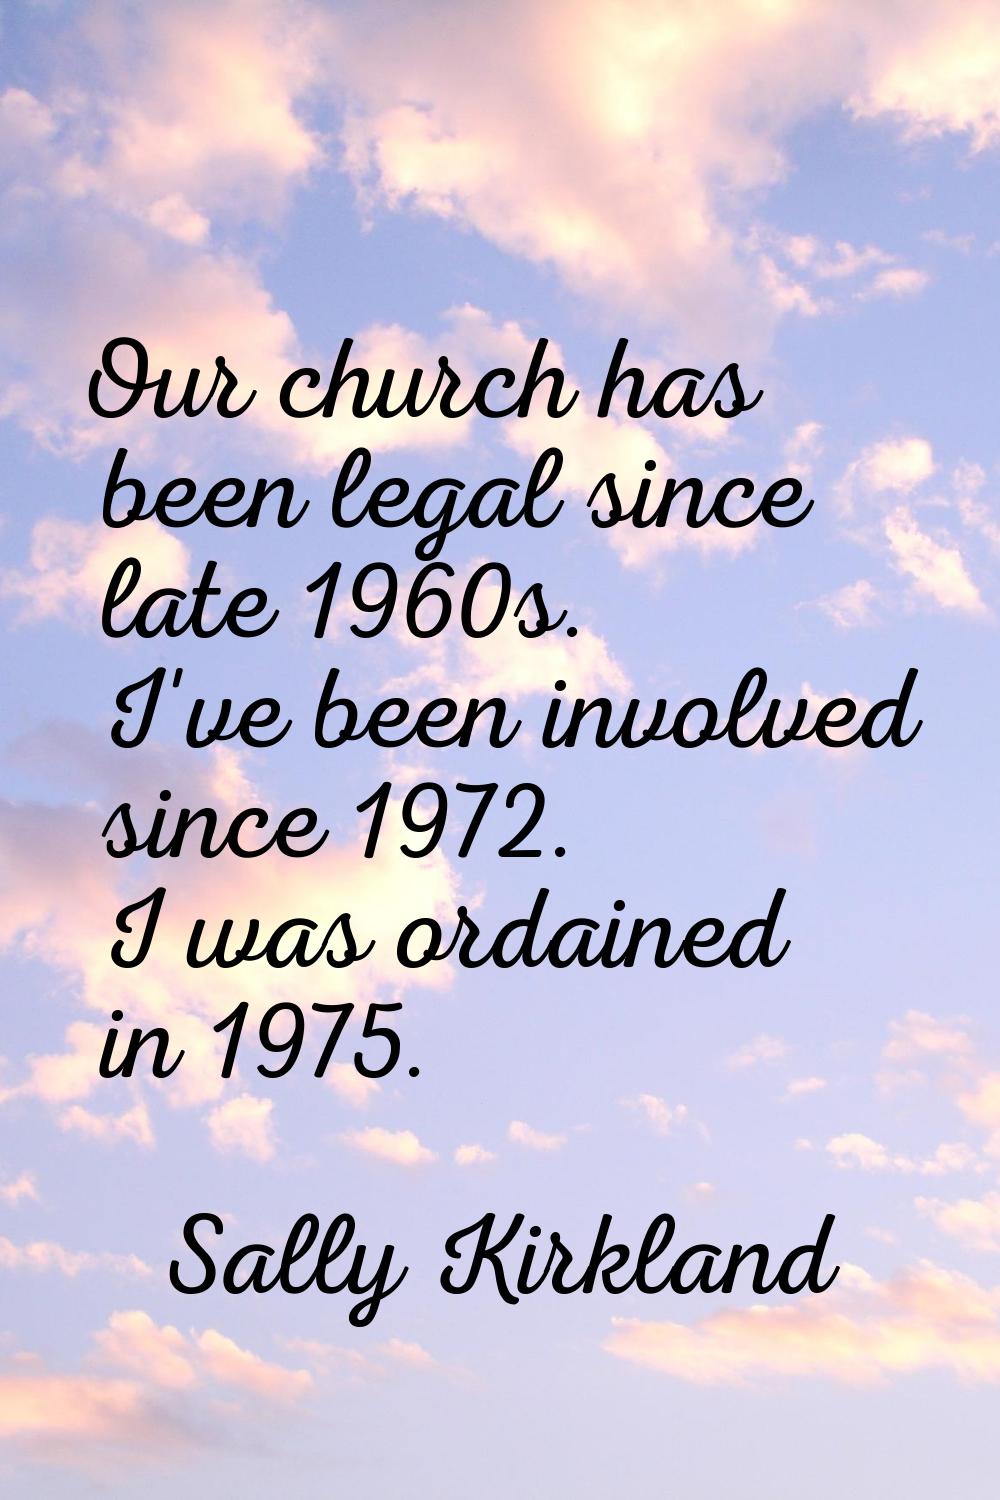 Our church has been legal since late 1960s. I've been involved since 1972. I was ordained in 1975.